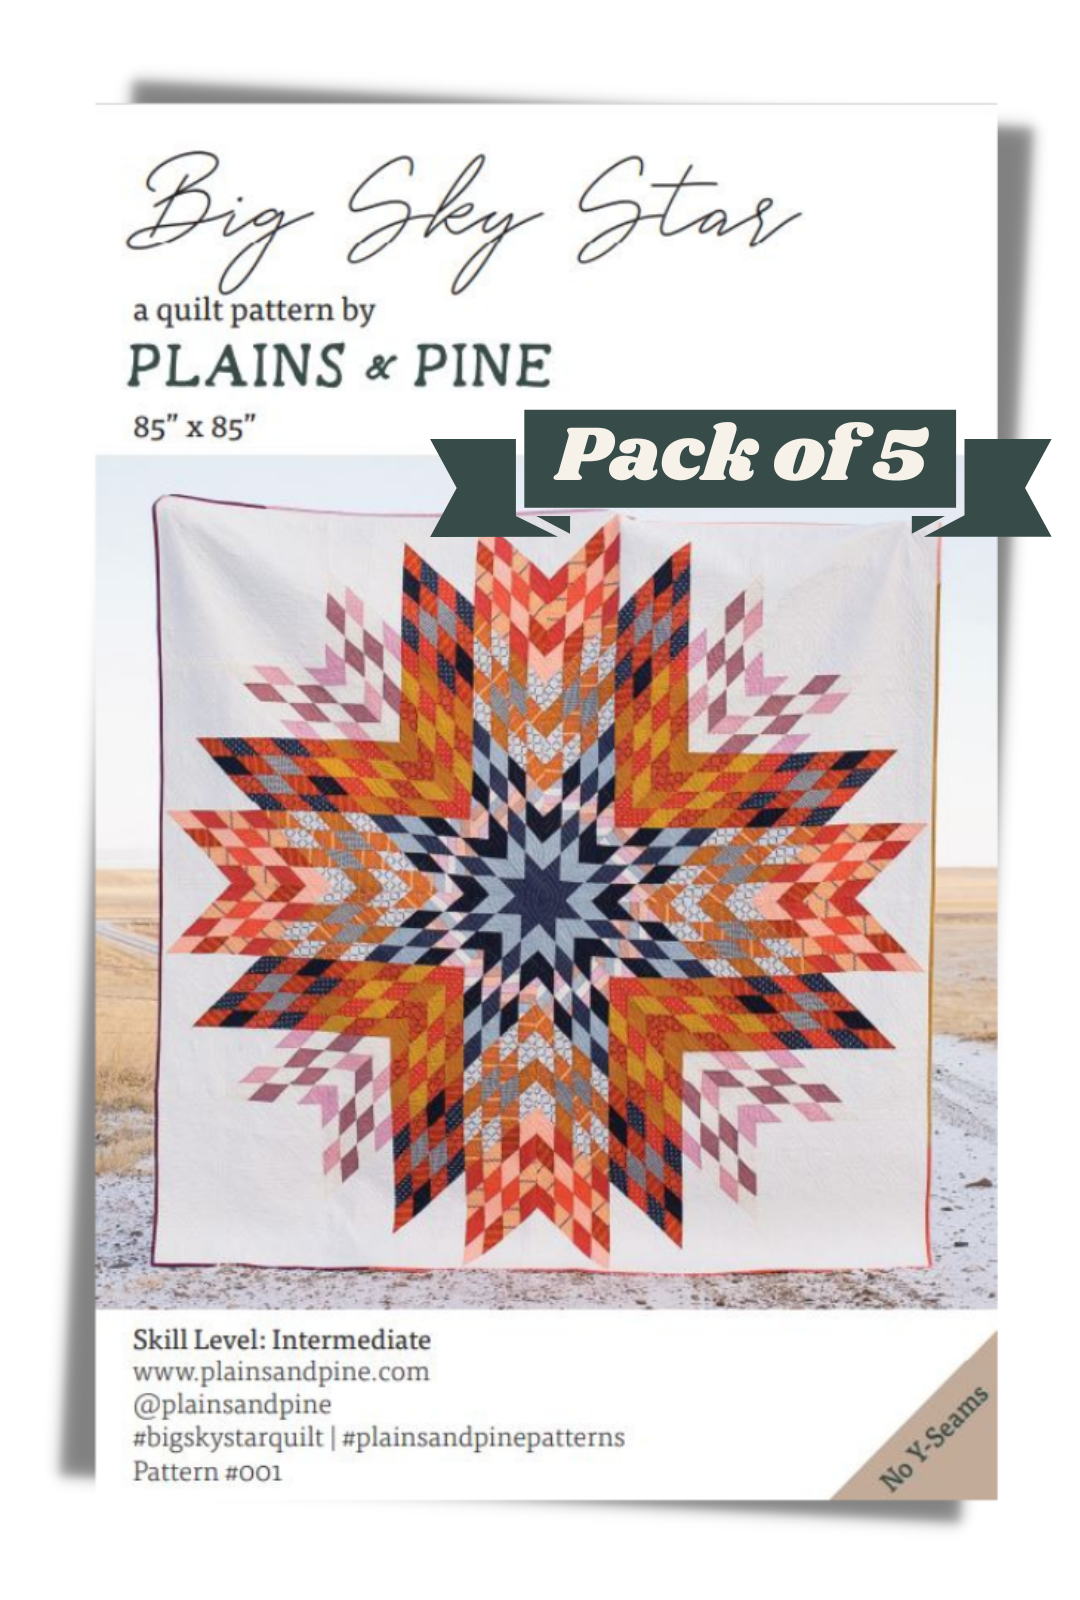 WHOLESALE - Big Sky Star Quilt Pattern, Pack of 5 patterns